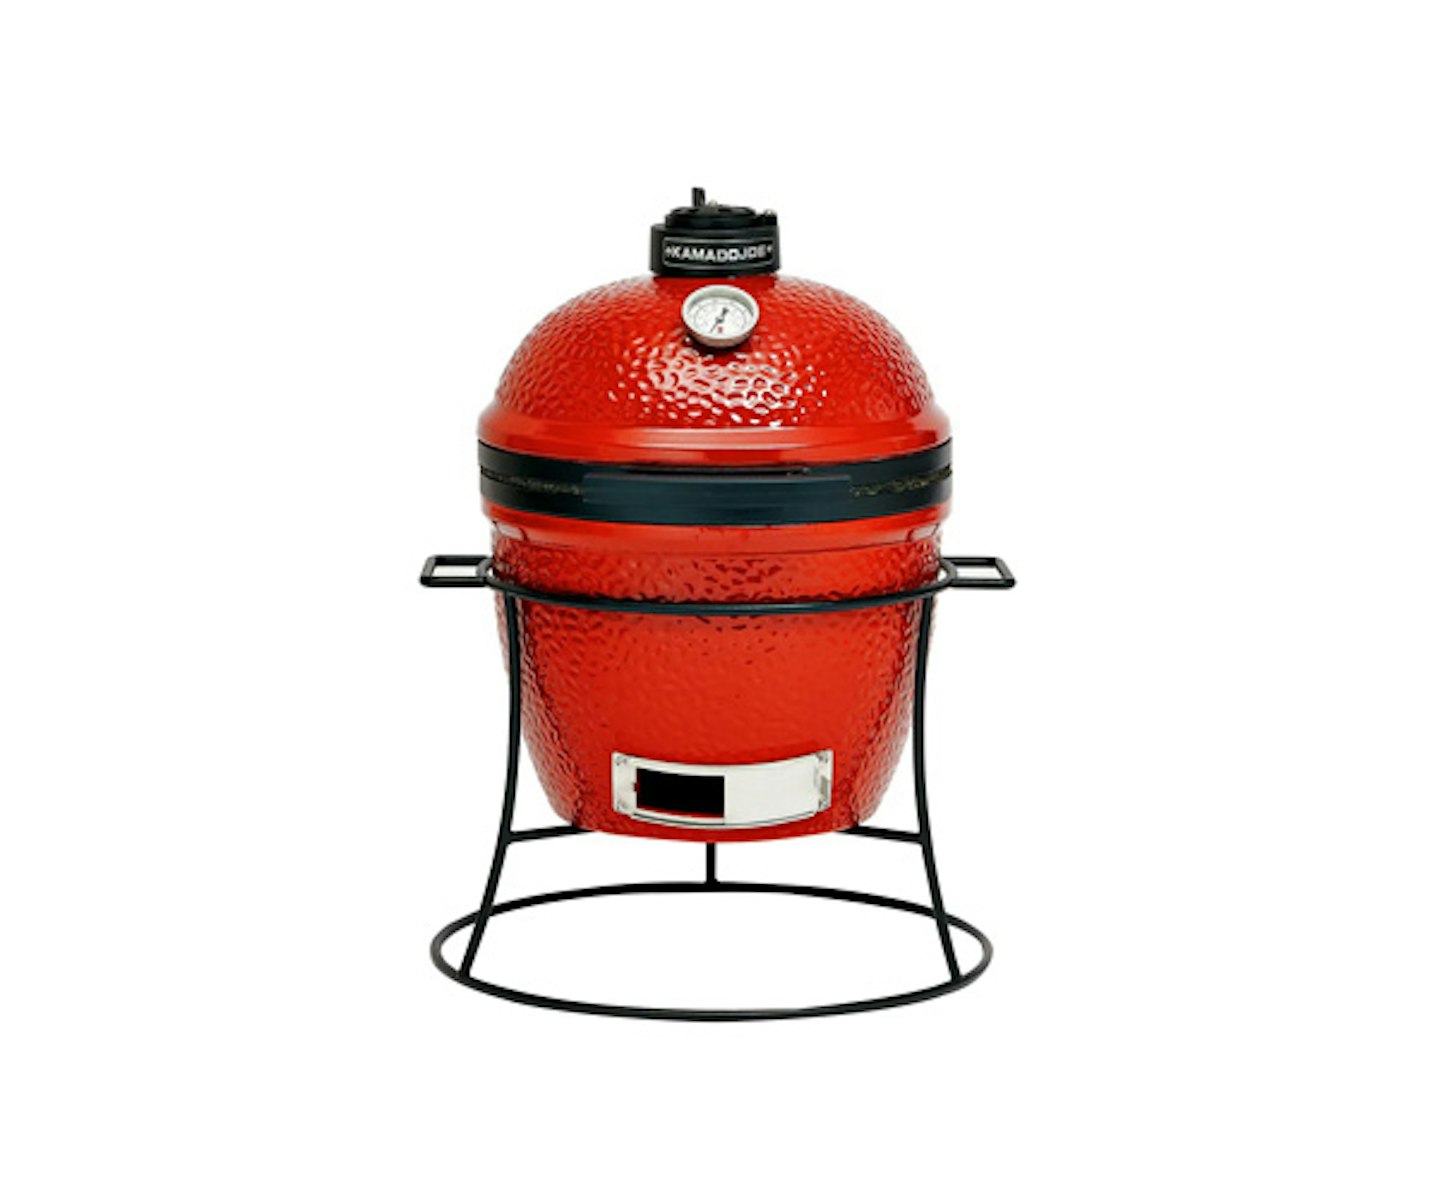 JOE JR™ WITH CAST IRON STAND